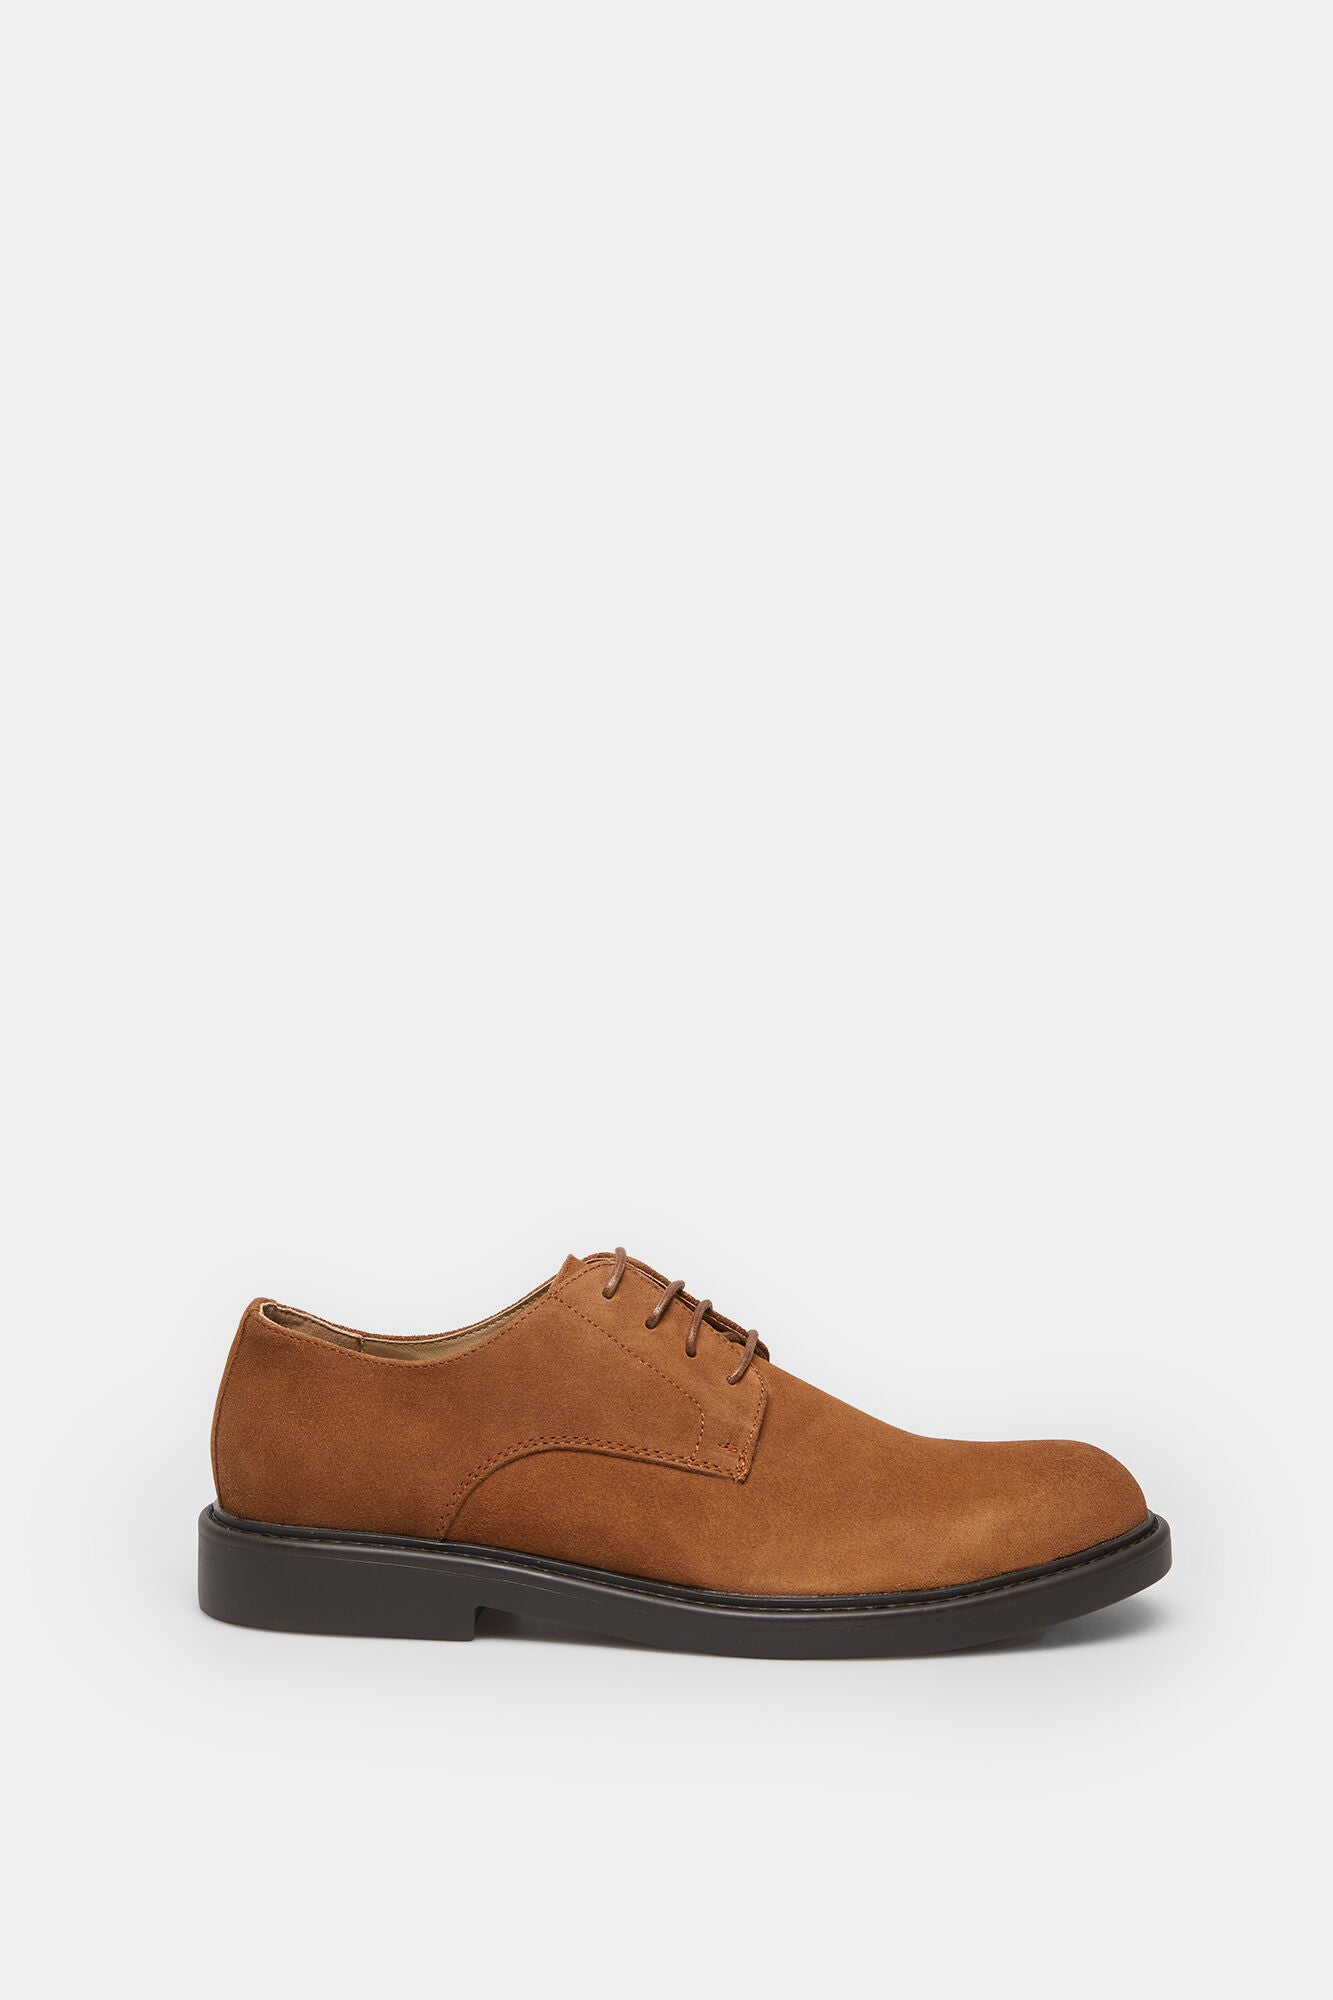 Brown Split Leather Shoes